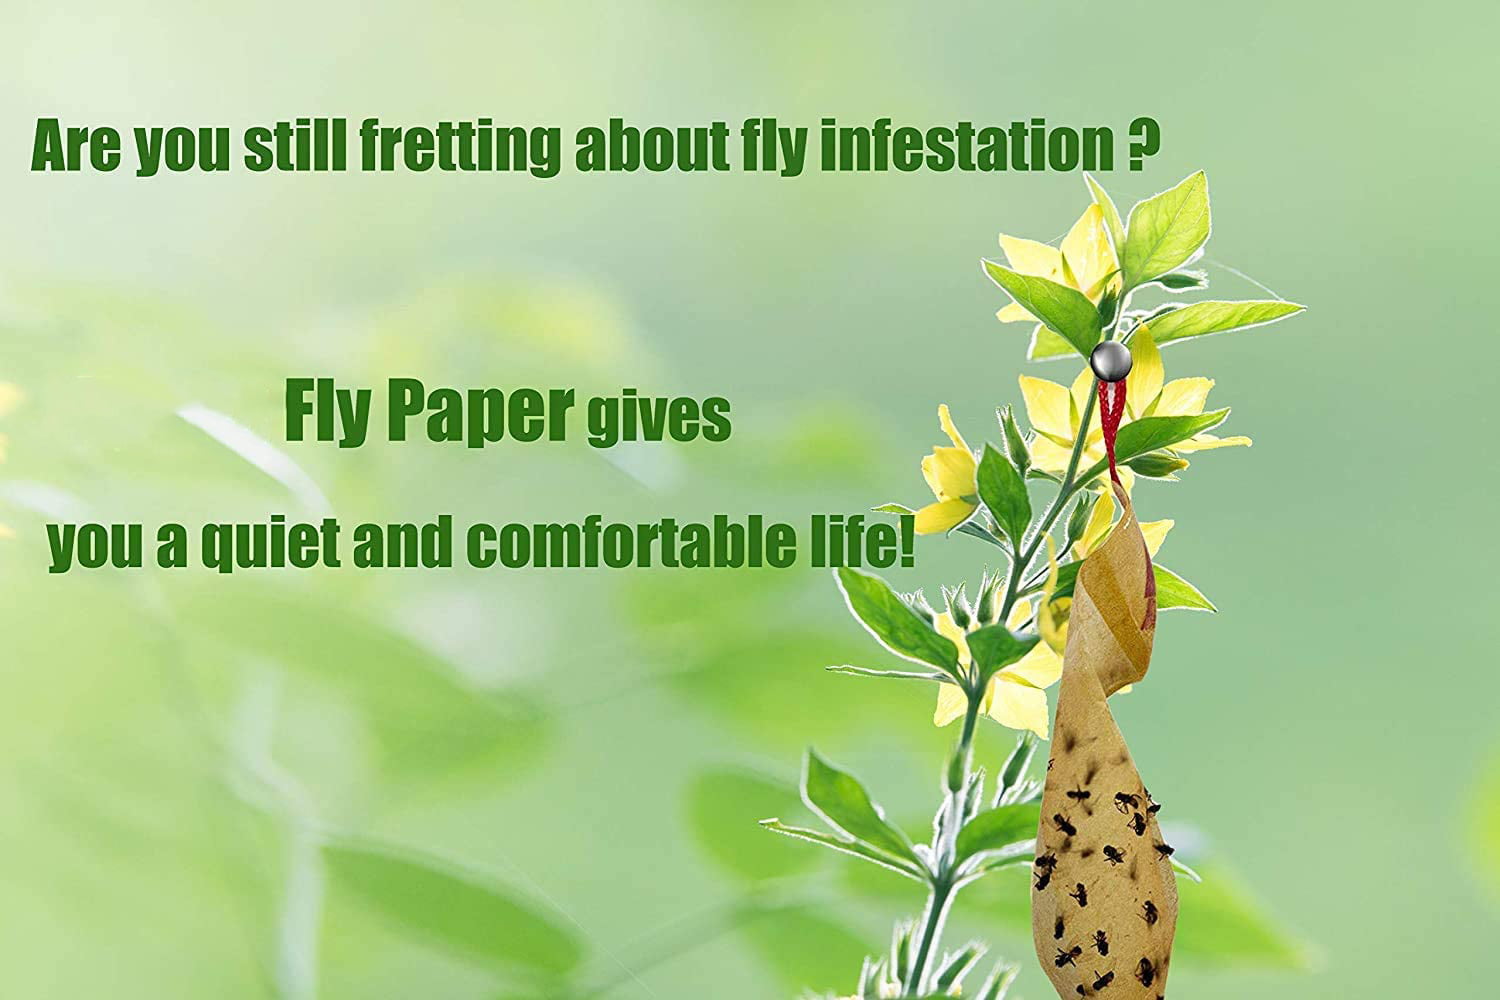 16 Rolls Fly Paper Strips - Fly Tapes Fly Paper Sticky Fly Trap  Indoor/Outdoor Hanging,Fly Catcher Fly Ribbon Fungus Gnat Trap Fruit Fly  Killer for Plants/House/Kitchen/Horse Stable (16) 